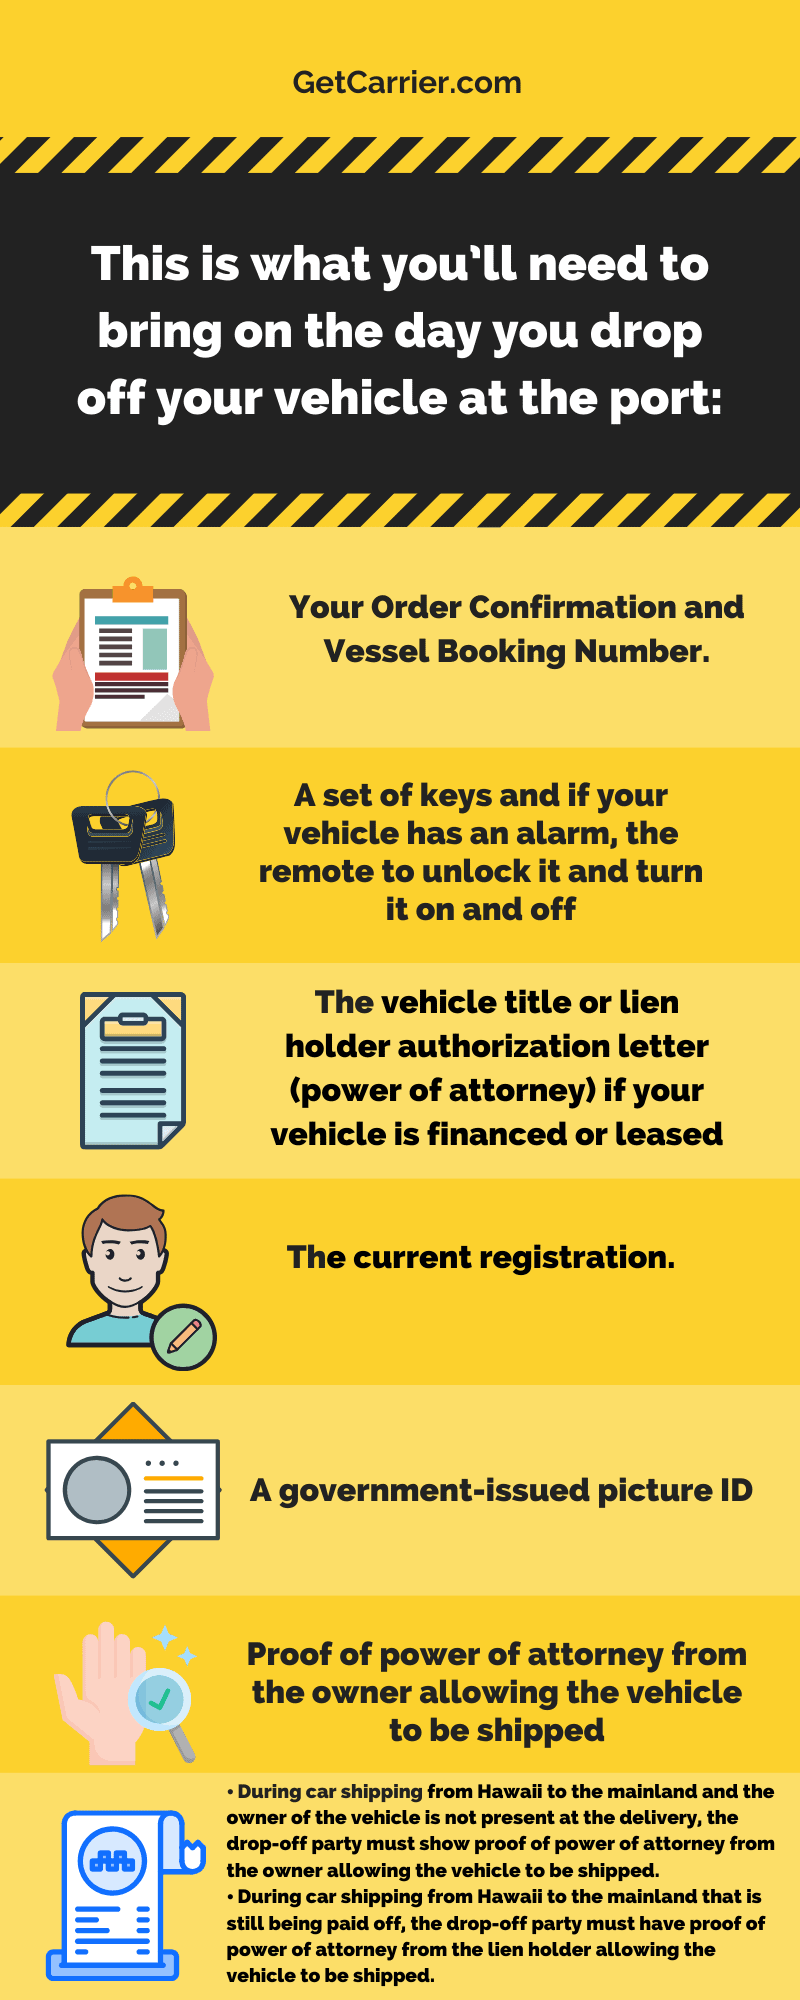 This is what you'll need to bring on the day you drop off your vehicle at the port infographic